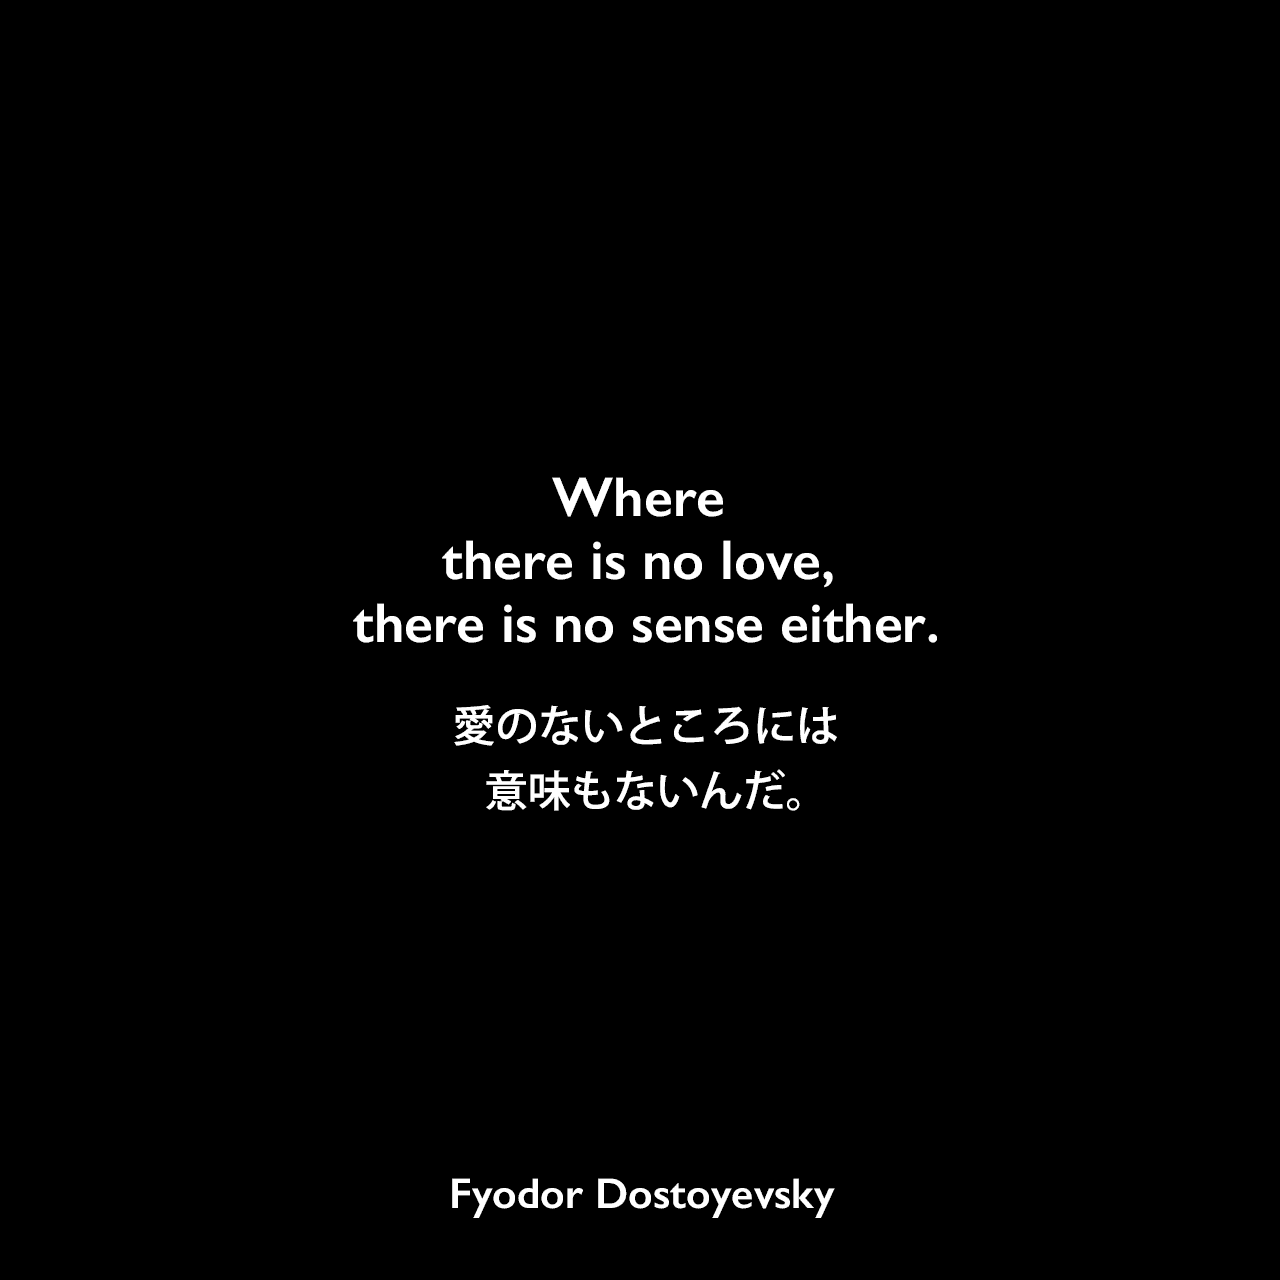 Where there is no love, there is no sense either.愛のないところには、意味もないんだ。Fyodor Dostoyevsky